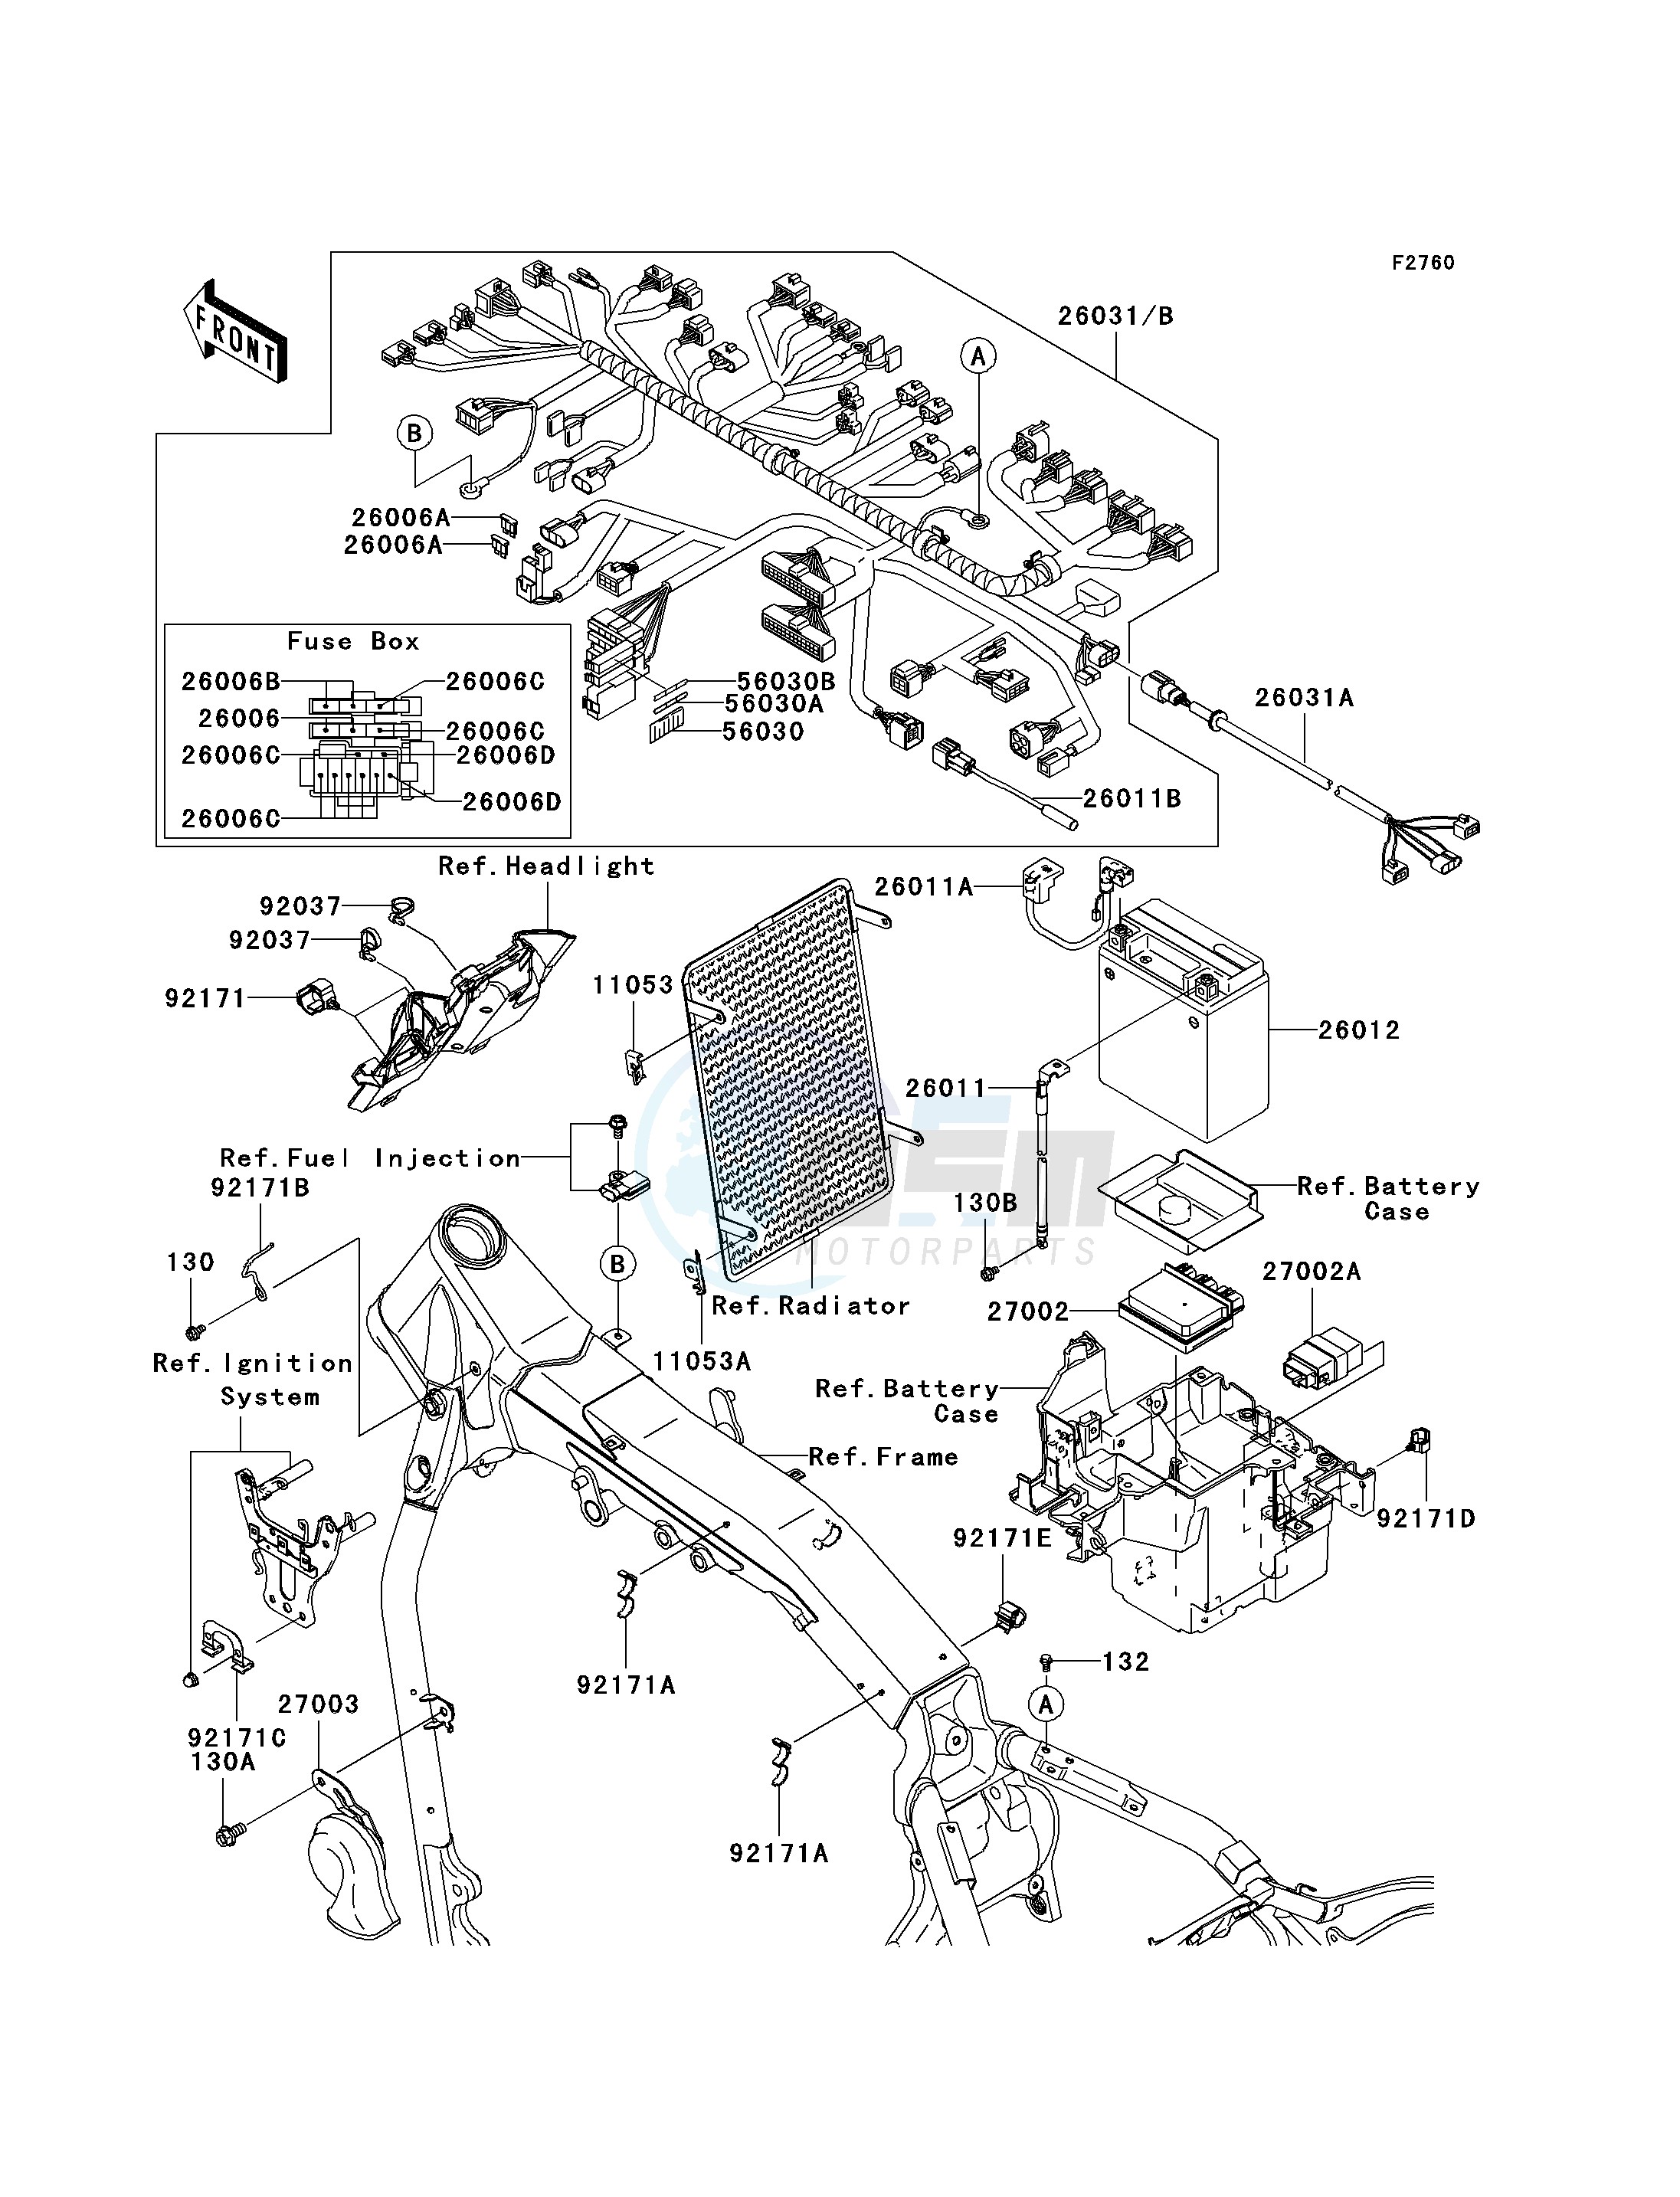 CHASSIS ELECTRICAL EQUIPMENT-- A1- - blueprint